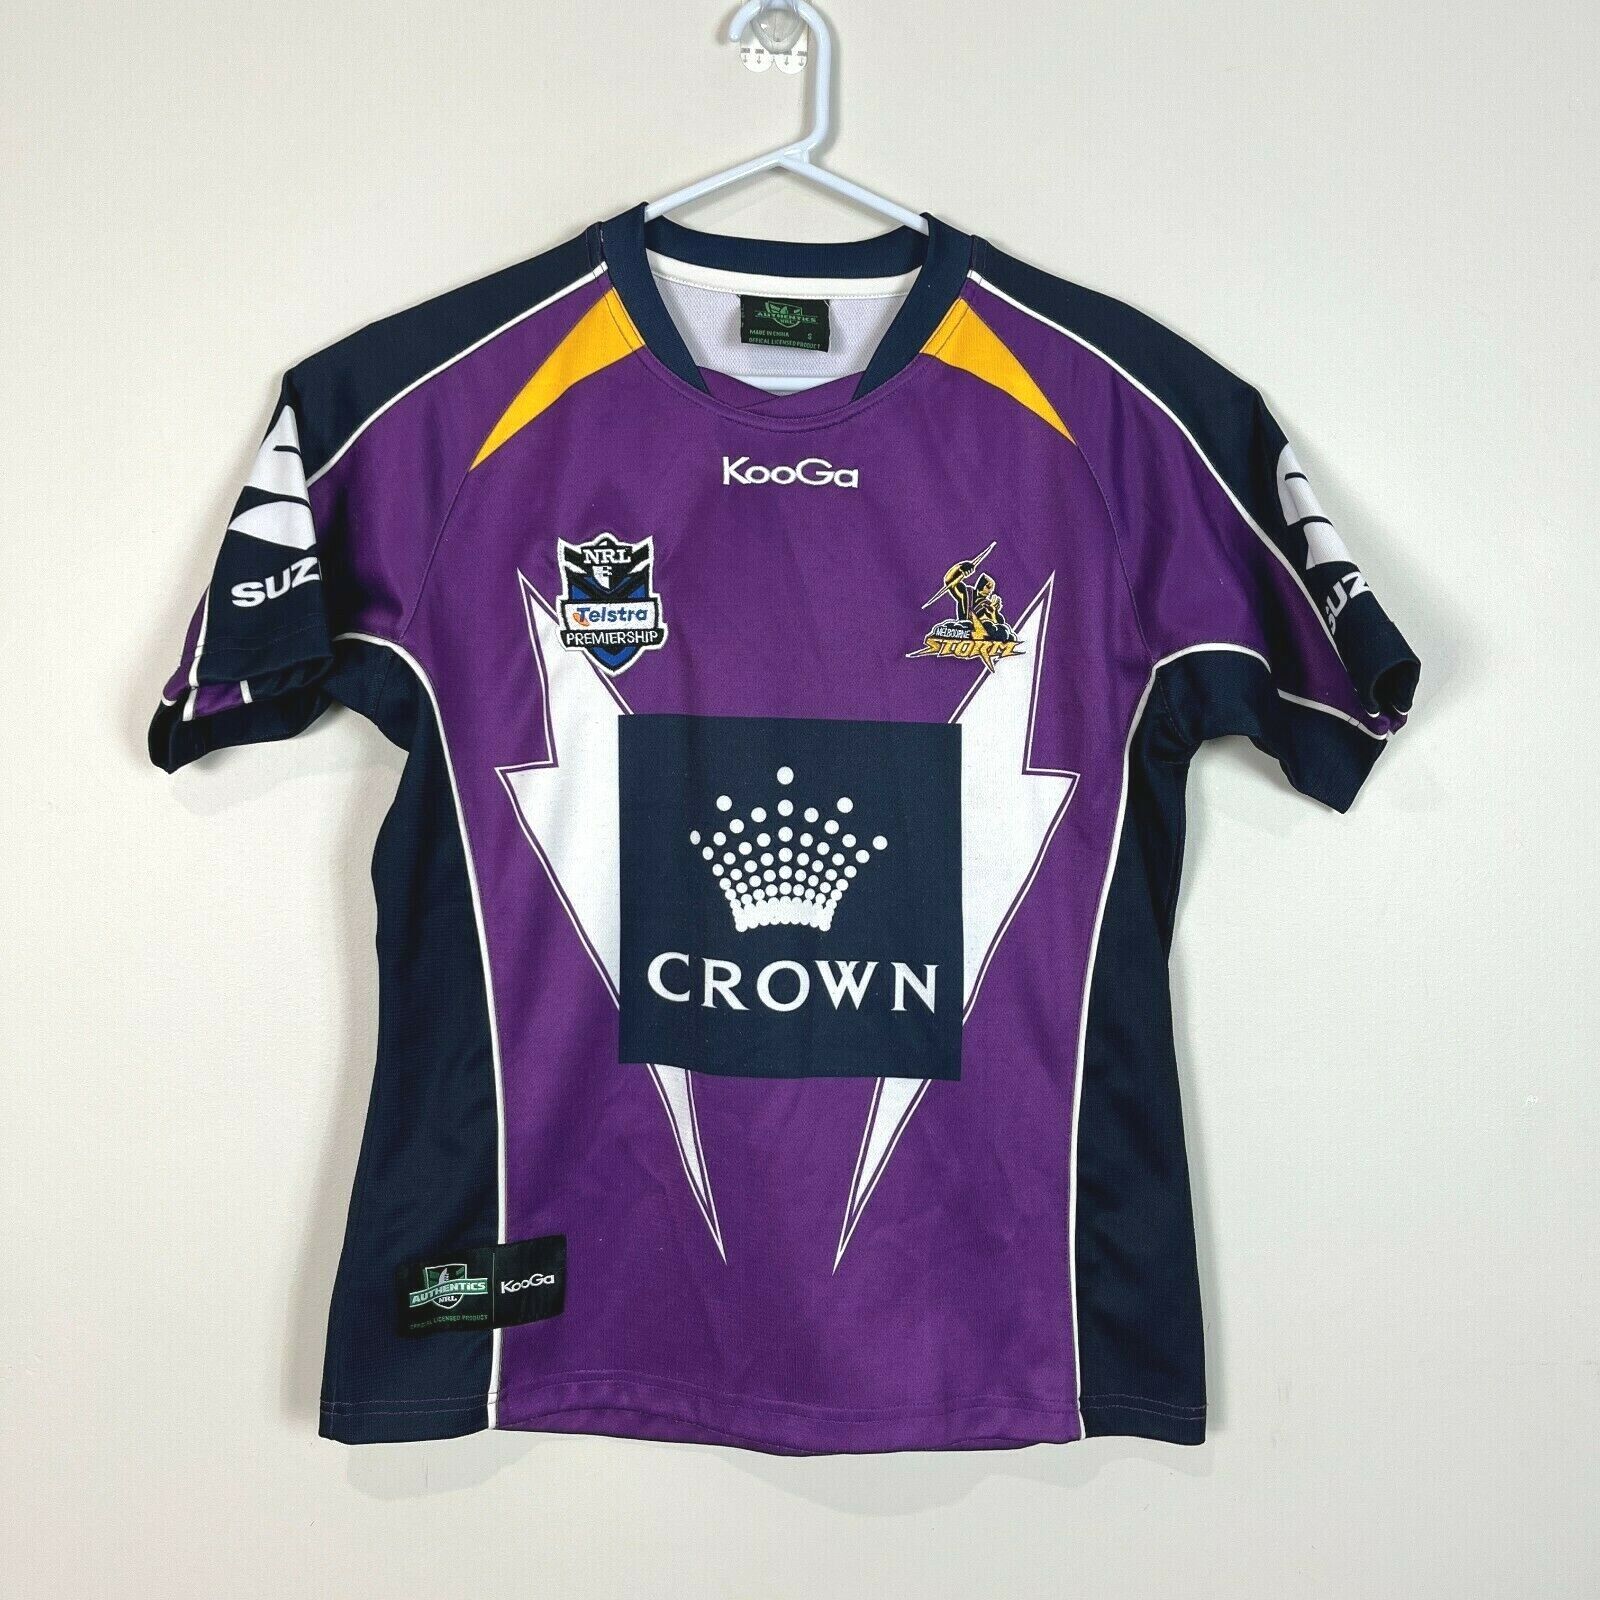 Melbourne Storm KooGa Jersey Men's Small S NRL Rugby League